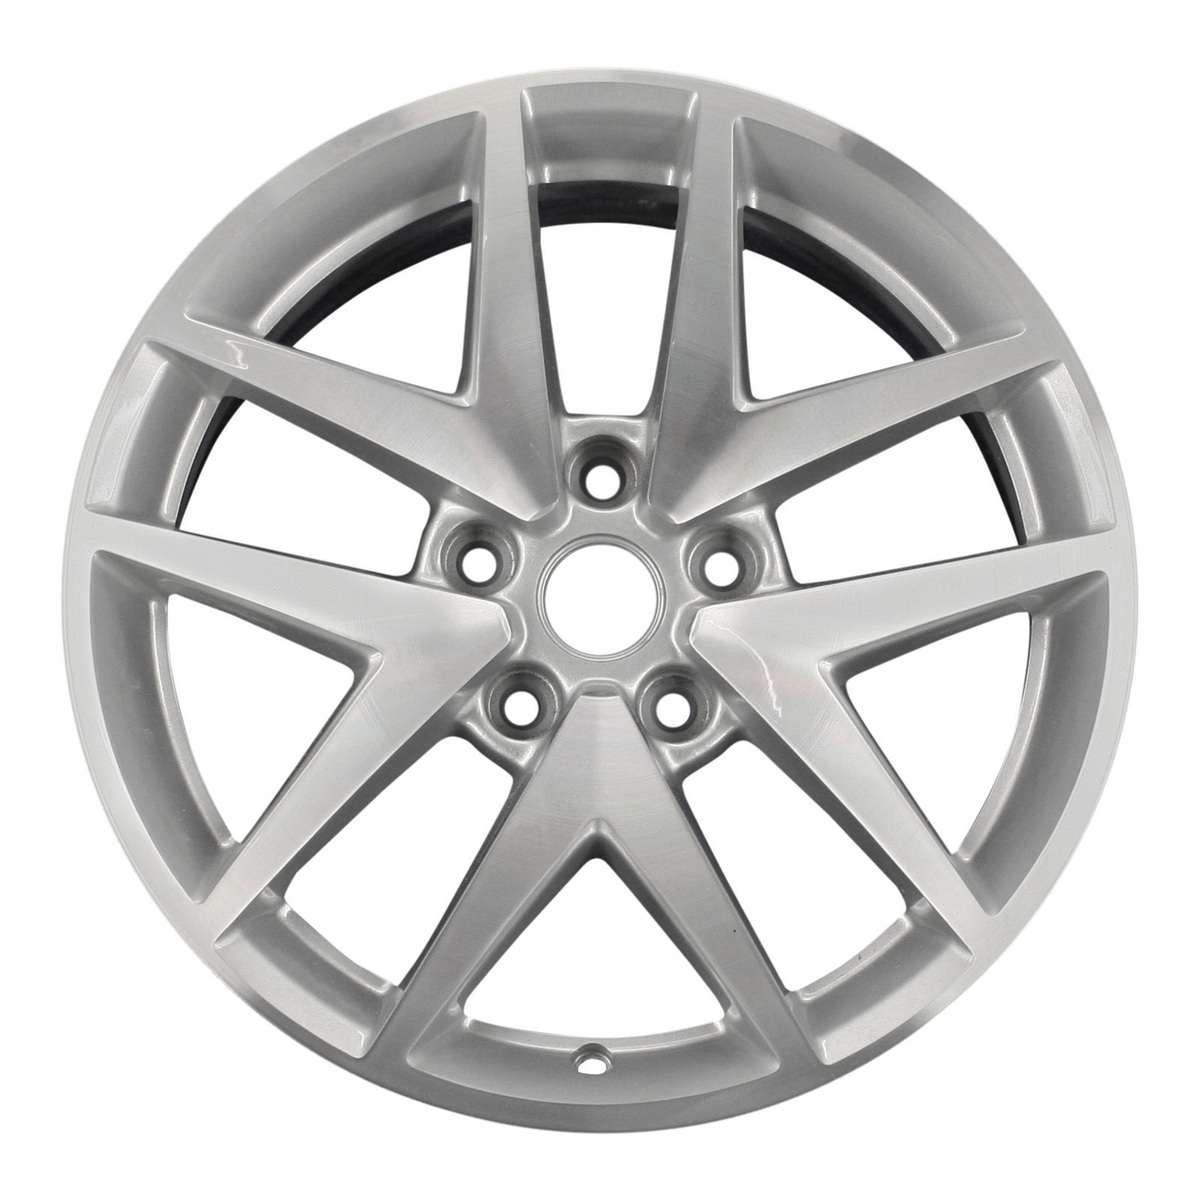 2011 Ford Fusion New 17" Replacement Wheel Rim RW3797MS